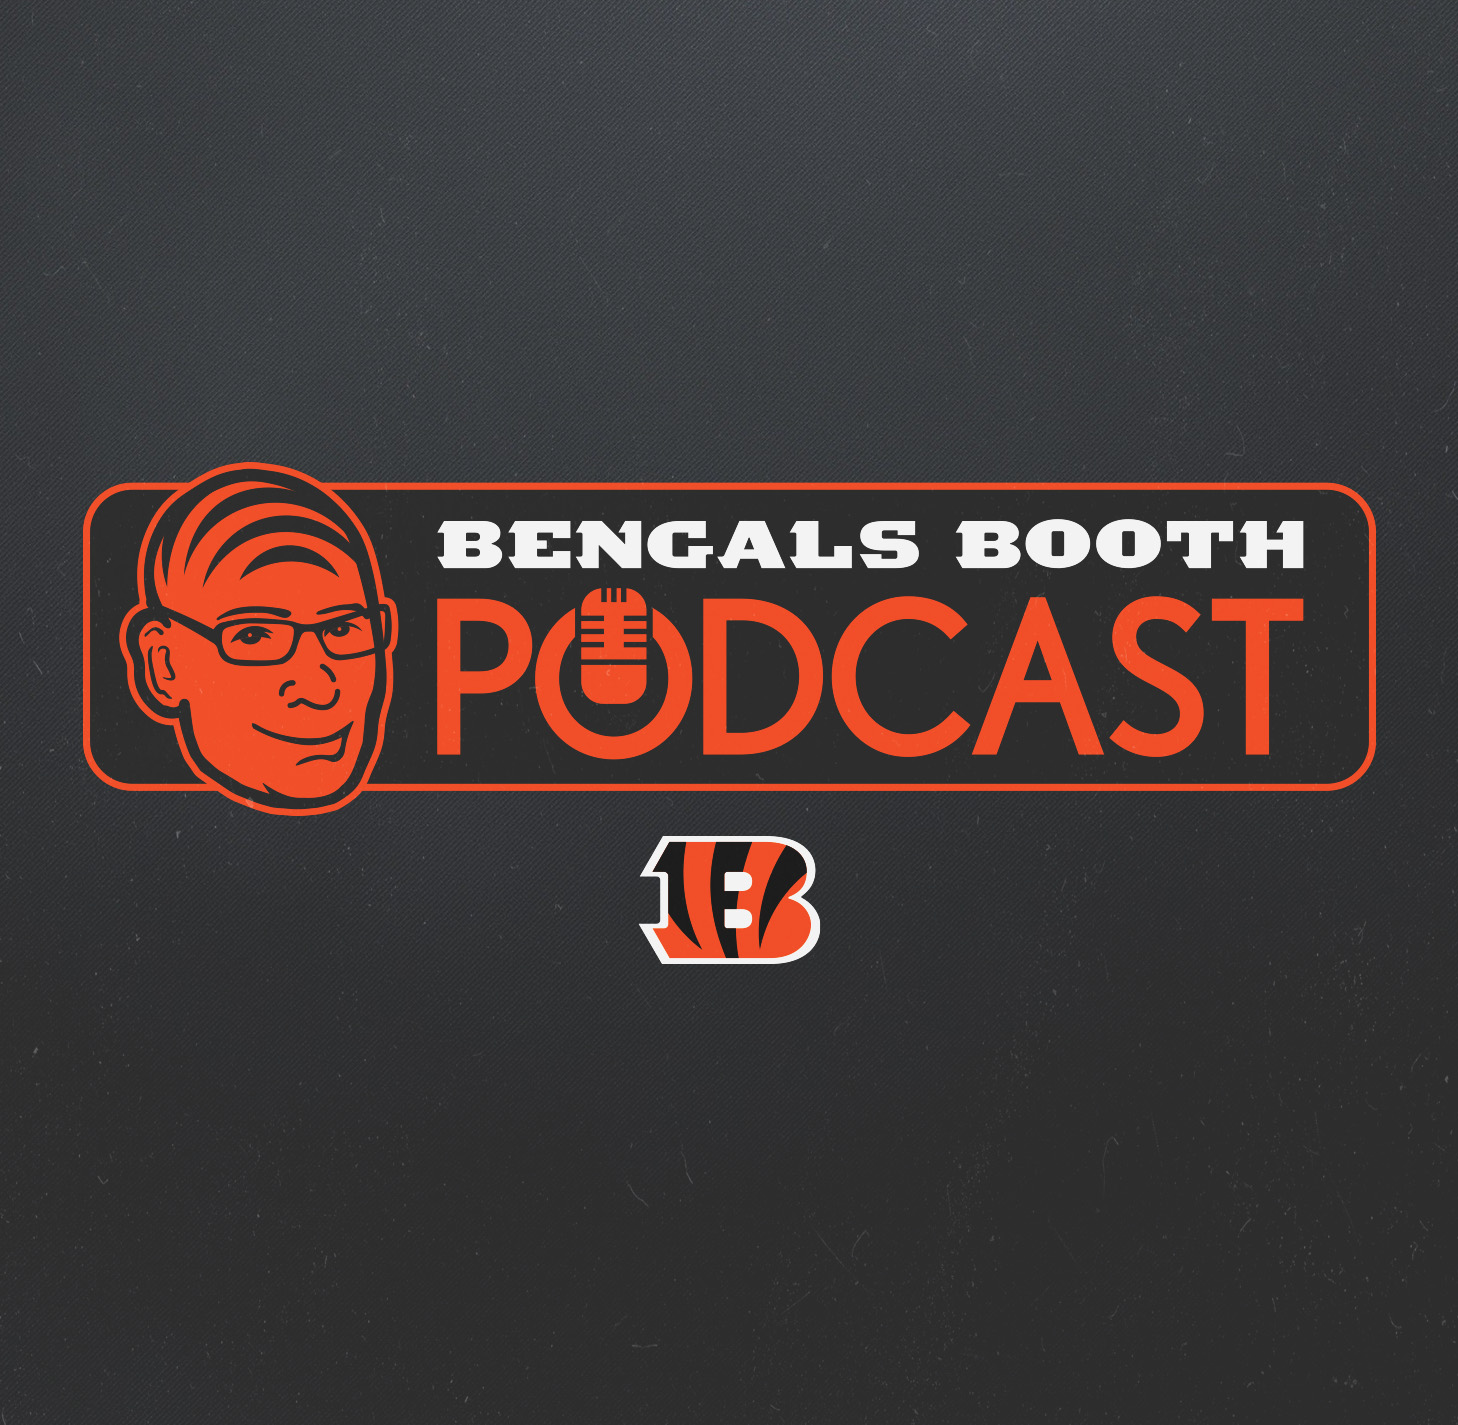 Bengals Booth Podcast: That's What I Like